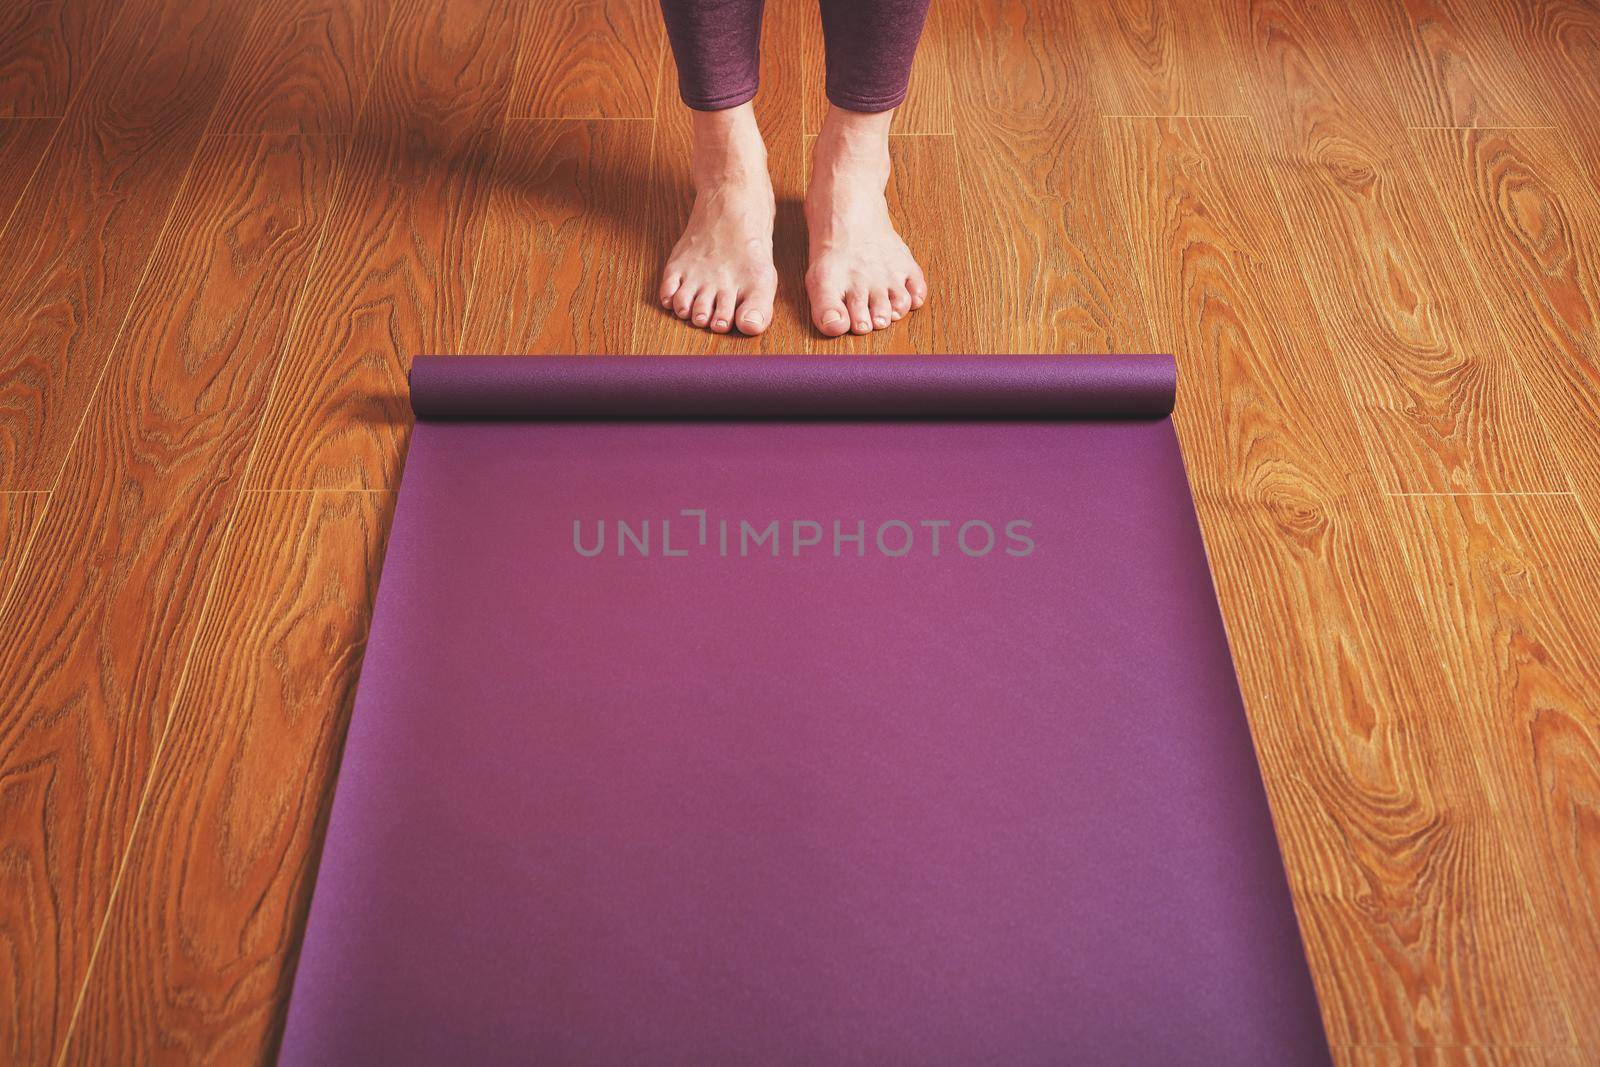 Legs and hands of a woman on a yoga mat practicing asanas. A healthy lifestyle at home in isolation.